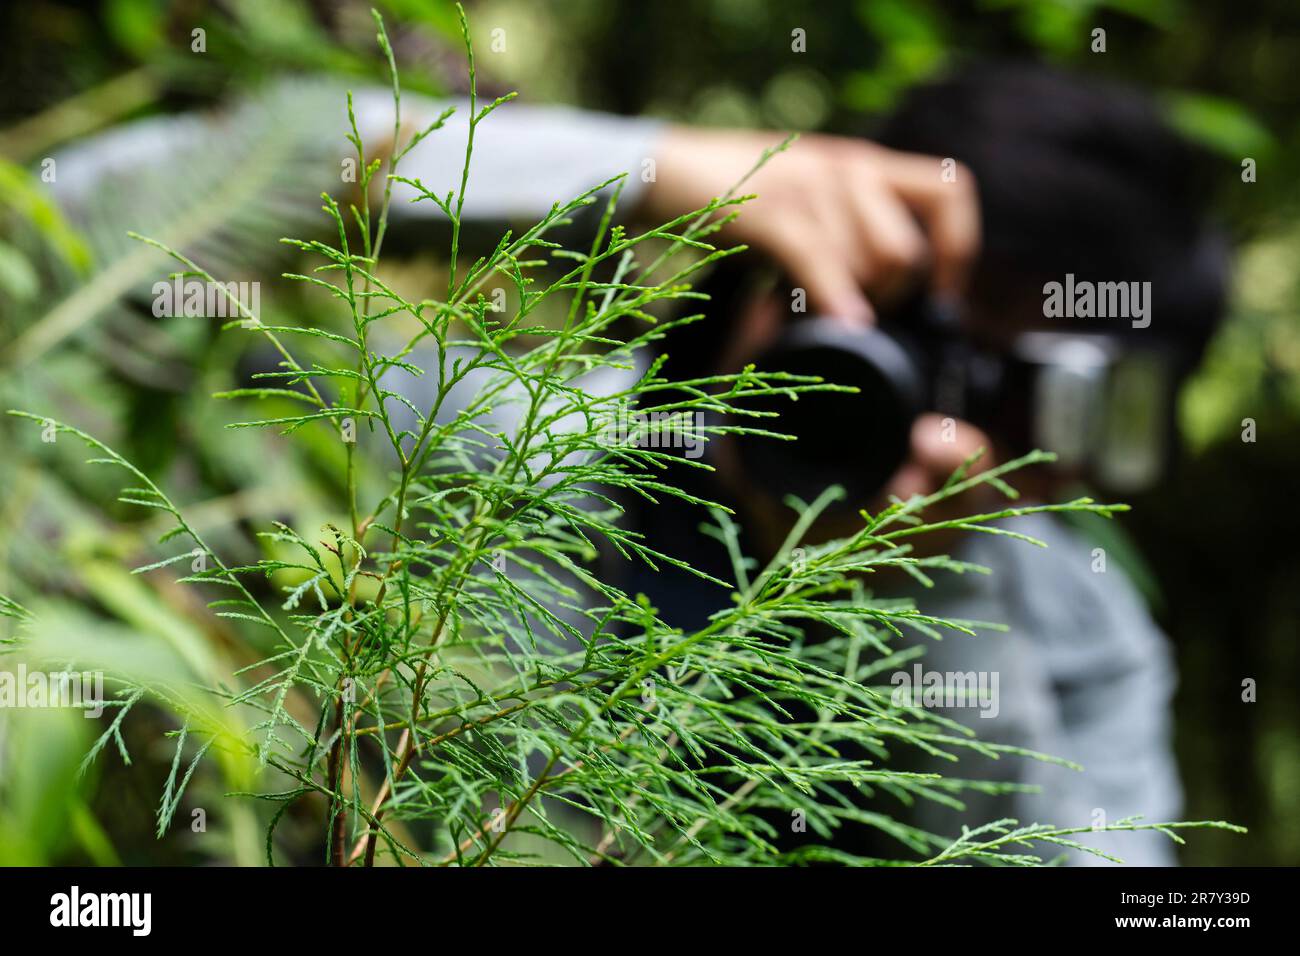 (230618) -- NYINGCHI, June 18, 2023 (Xinhua) -- Wang Zi takes pictures of a Cupressus torulosa sapling at the national nature reserve of the Yarlung Zangbo Grand Canyon in Bome County, Nyingchi City, southwest China's Tibet Autonomous Region, June 15, 2023. The record of the tallest tree in the Chinese mainland has been refreshed several times in the past year or so. Last year in April, a research team led by Peking University found a 76.8-meter tree in Medog County in southwest China's Tibet Autonomous Region, marking China's tallest tree at the time. The record was broken a month later when Stock Photo